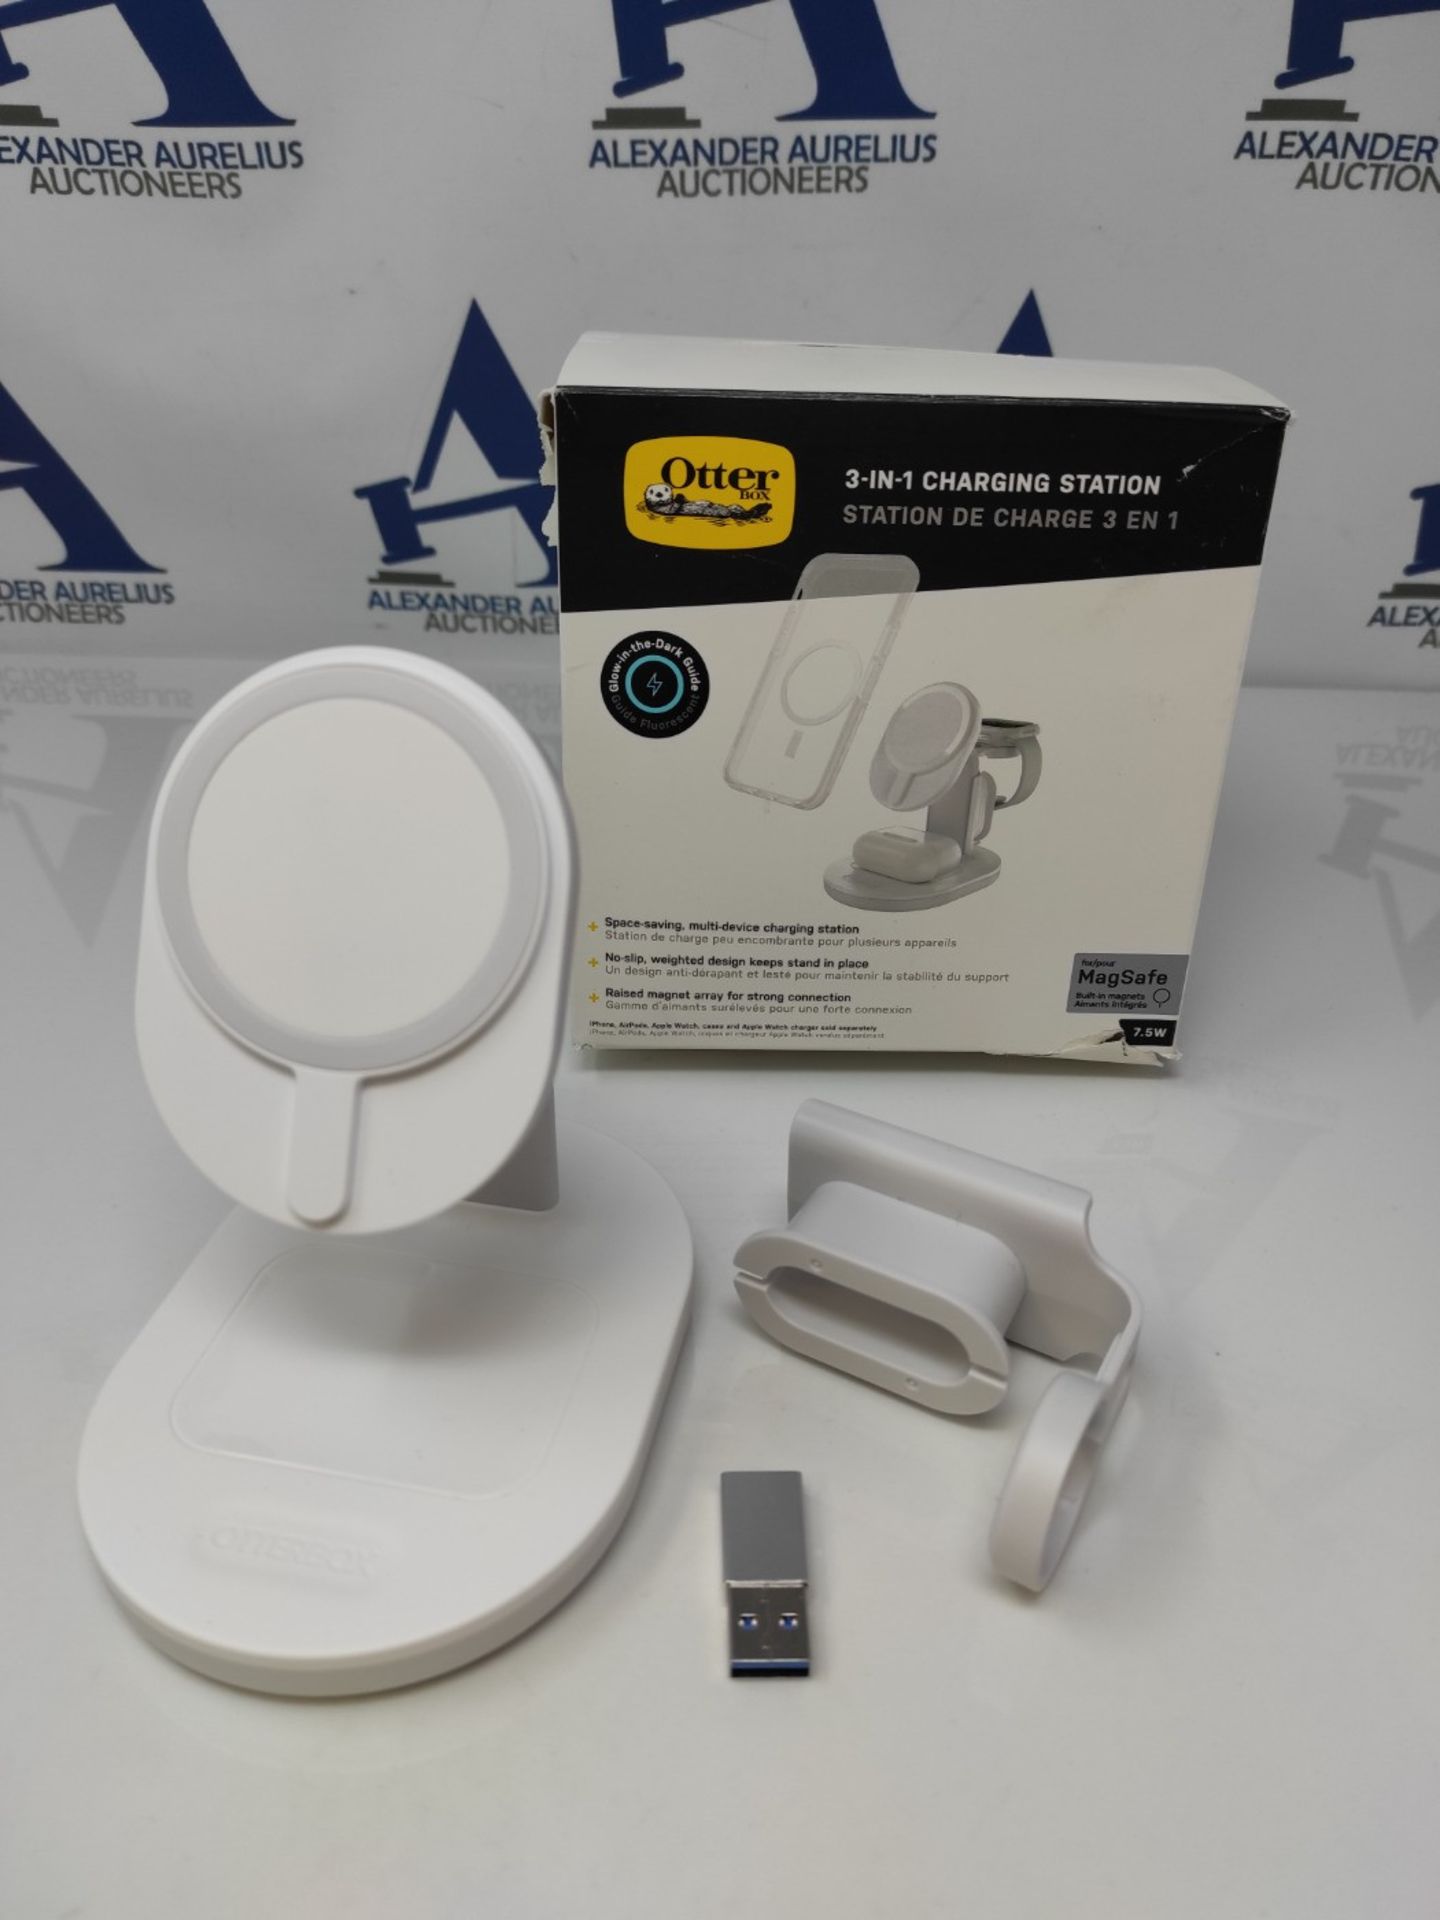 RRP £69.00 OtterBox Wireless 3 in 1 MagSafe Charging Stand, Strong Magnetic Alignment and Attachm - Bild 2 aus 2